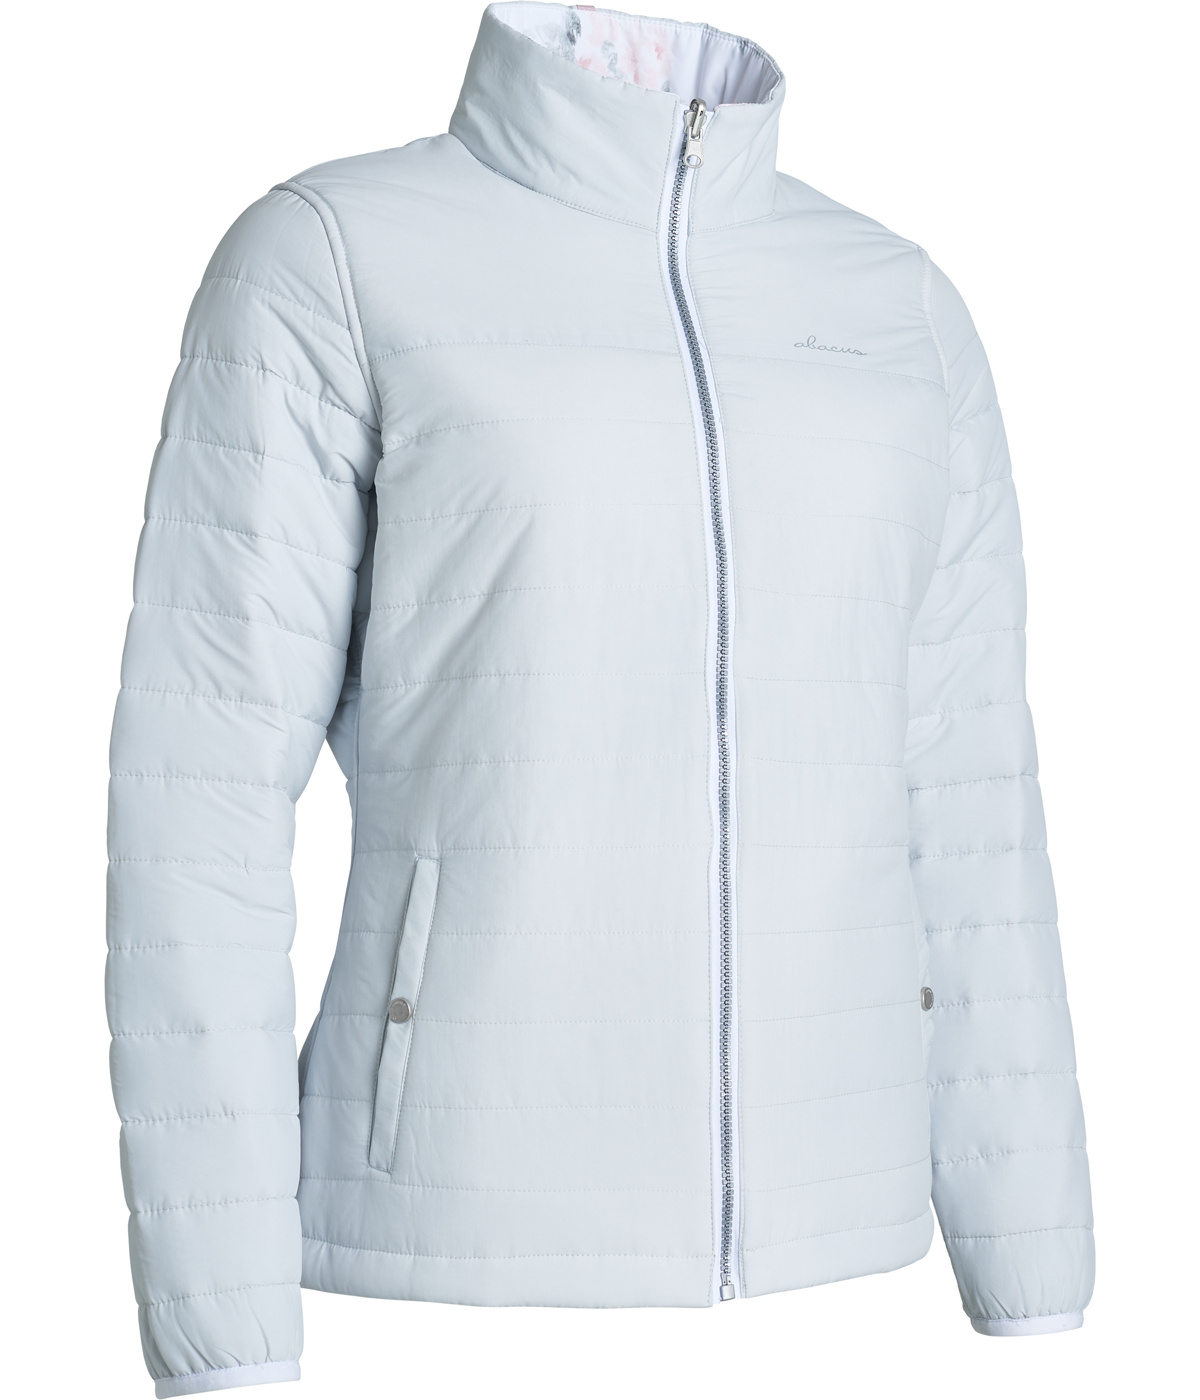 Abacus Sportswear Heaven Padded Reversible Women's Golf Jacket - Fog melange  - Fore Ladies - Golf Dresses and Clothes, Tennis Skirts and Outfits, and  Fashionable Activewear